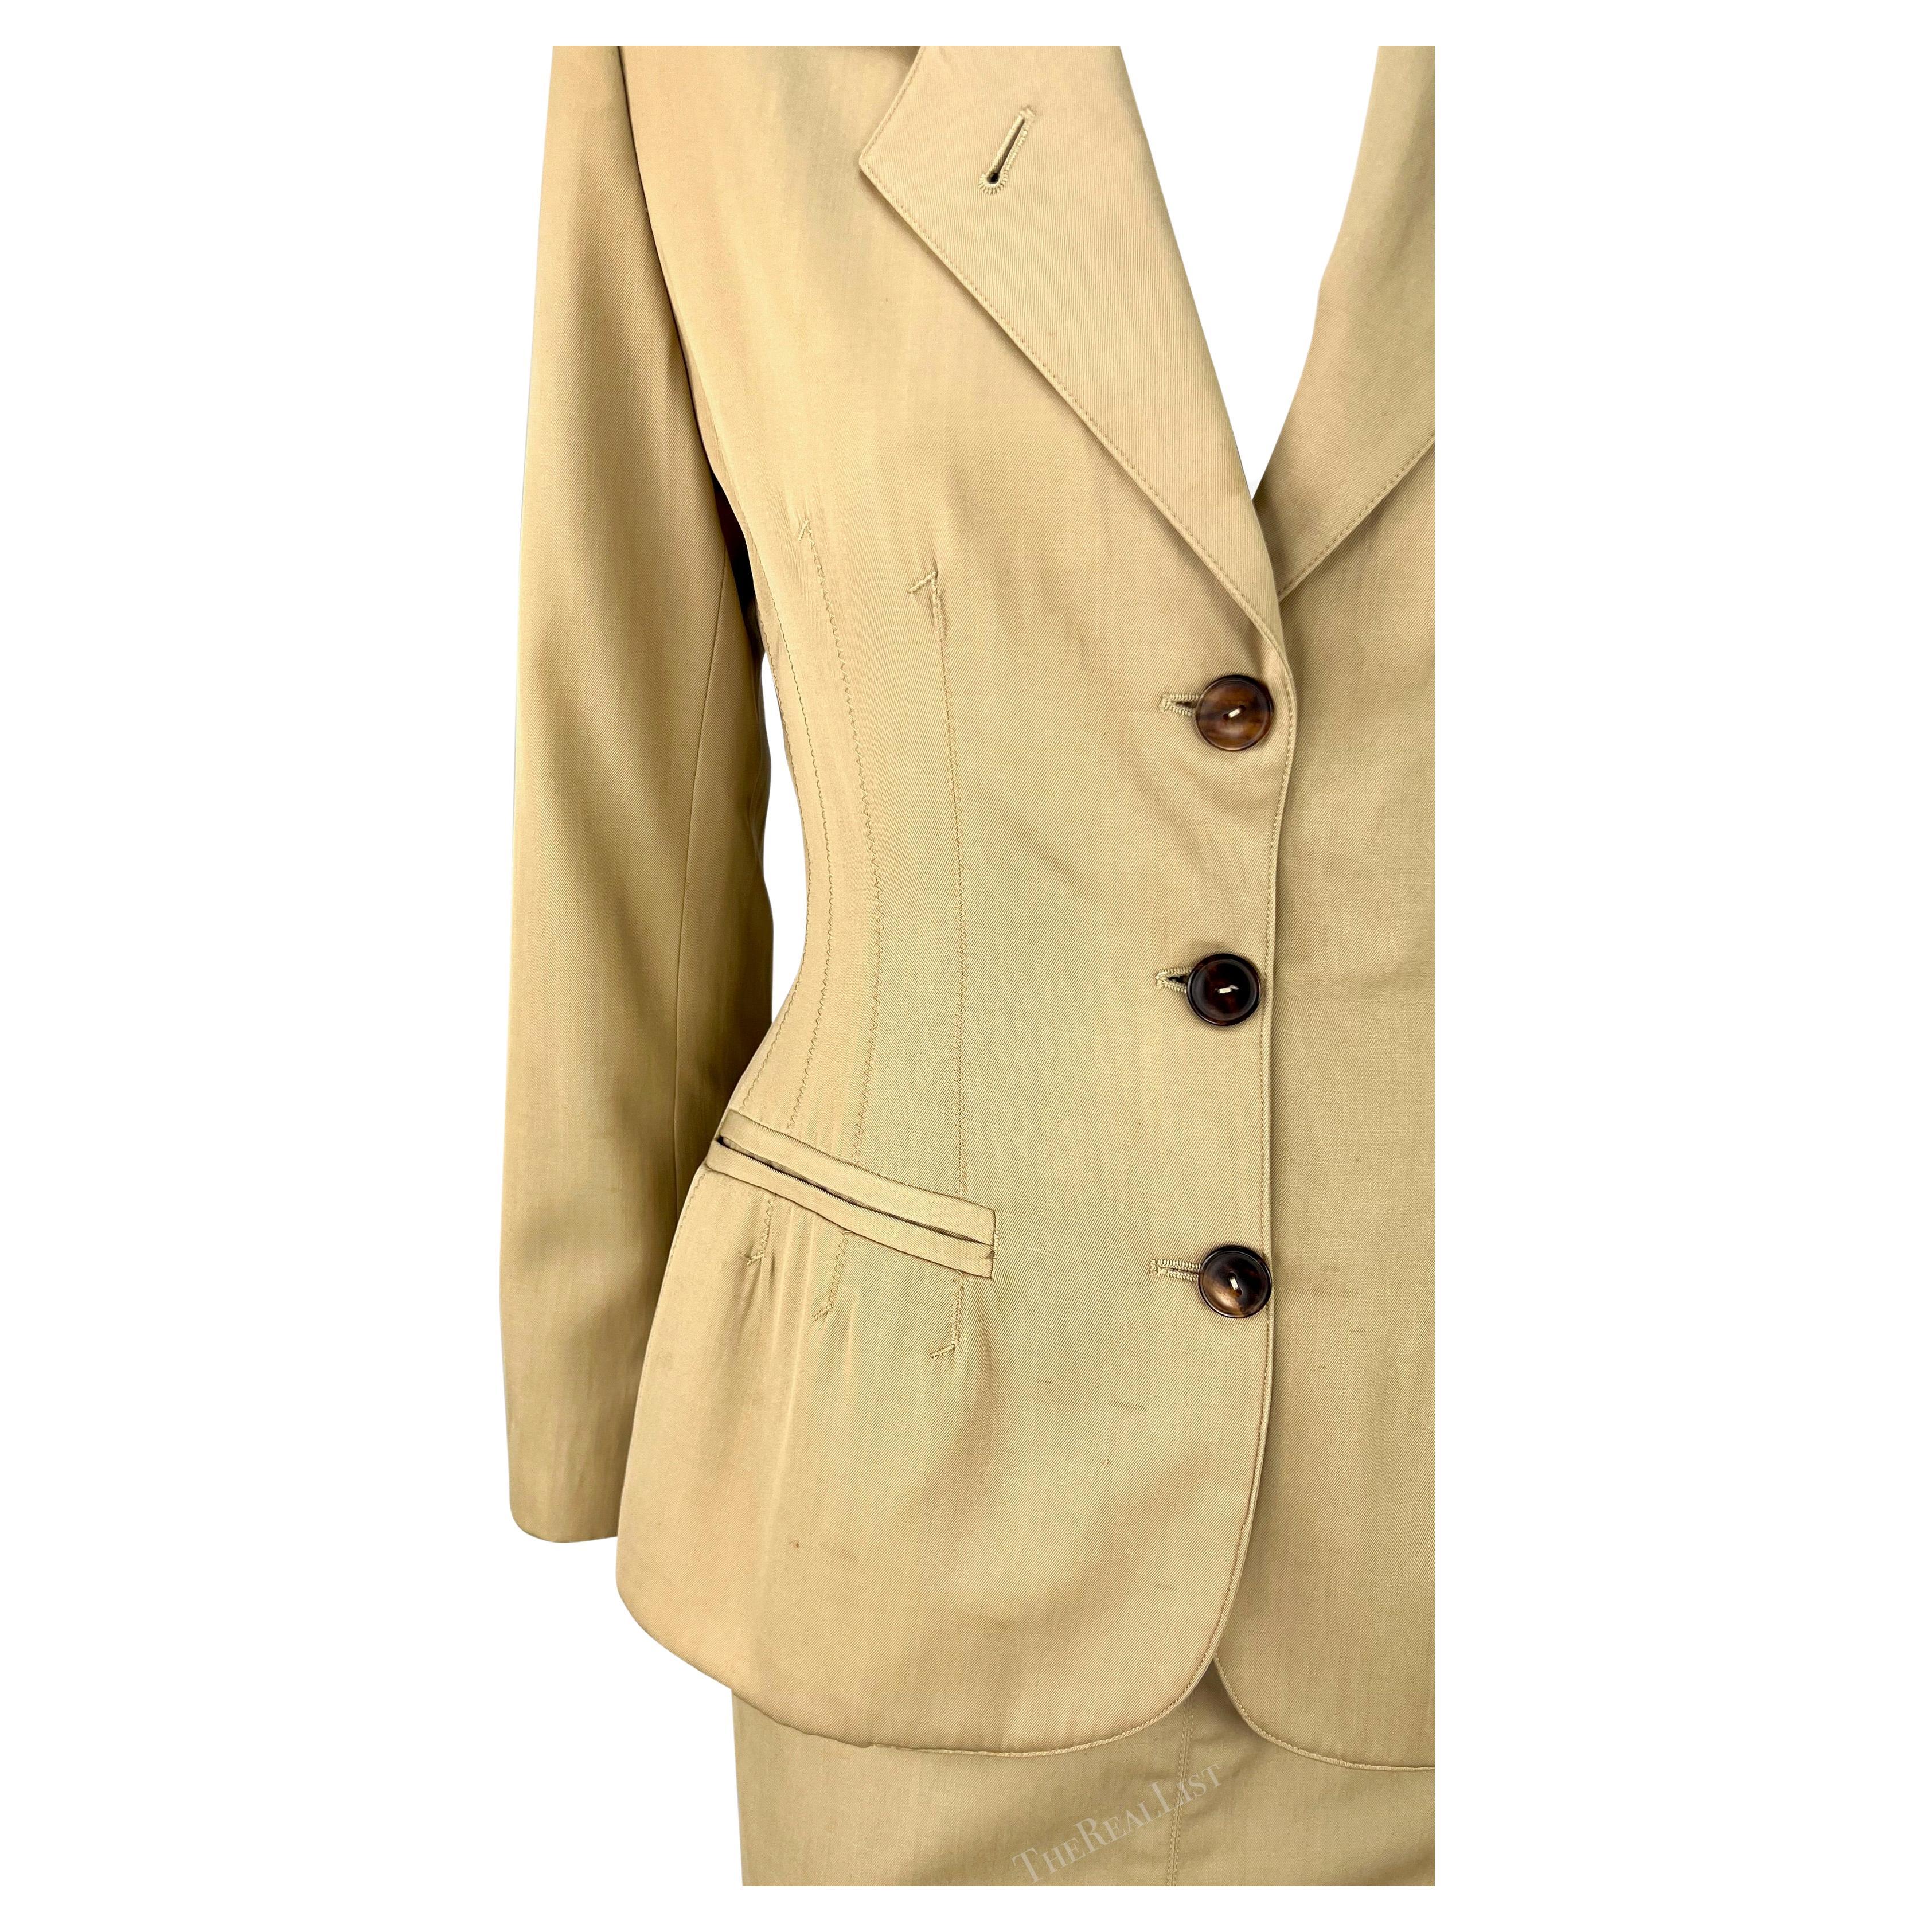 Early 1990s Jean Paul Gaultier Tan Skirt Suit In Excellent Condition For Sale In West Hollywood, CA